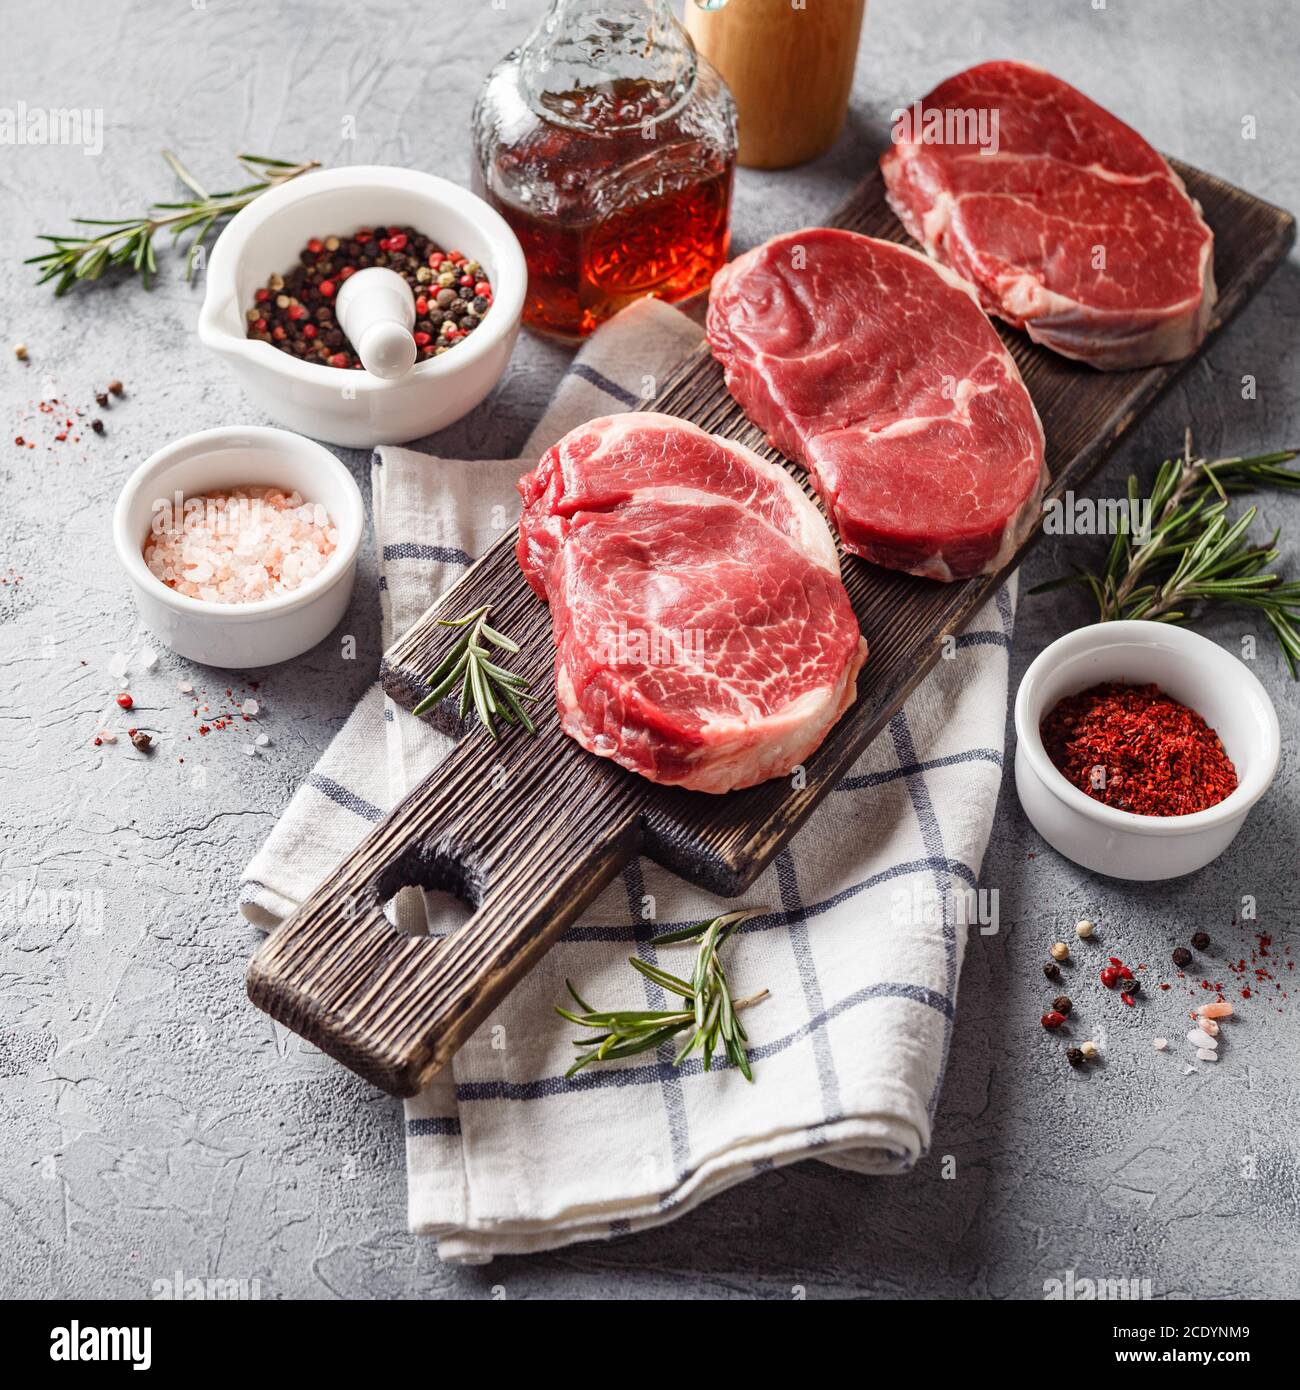 Shoulder cut, suitable for grilling and pan. Stock Photo